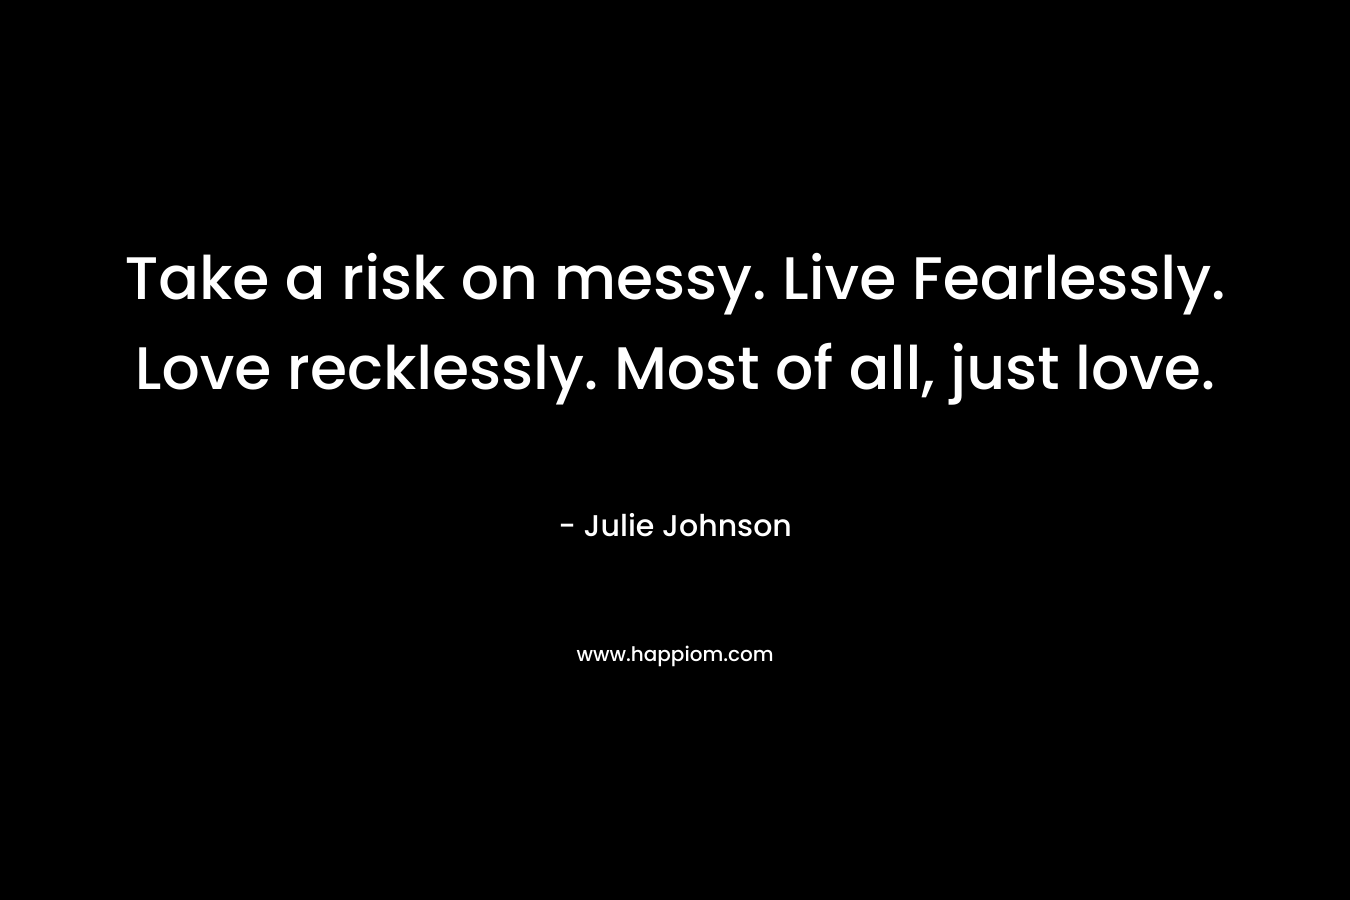 Take a risk on messy. Live Fearlessly. Love recklessly. Most of all, just love.